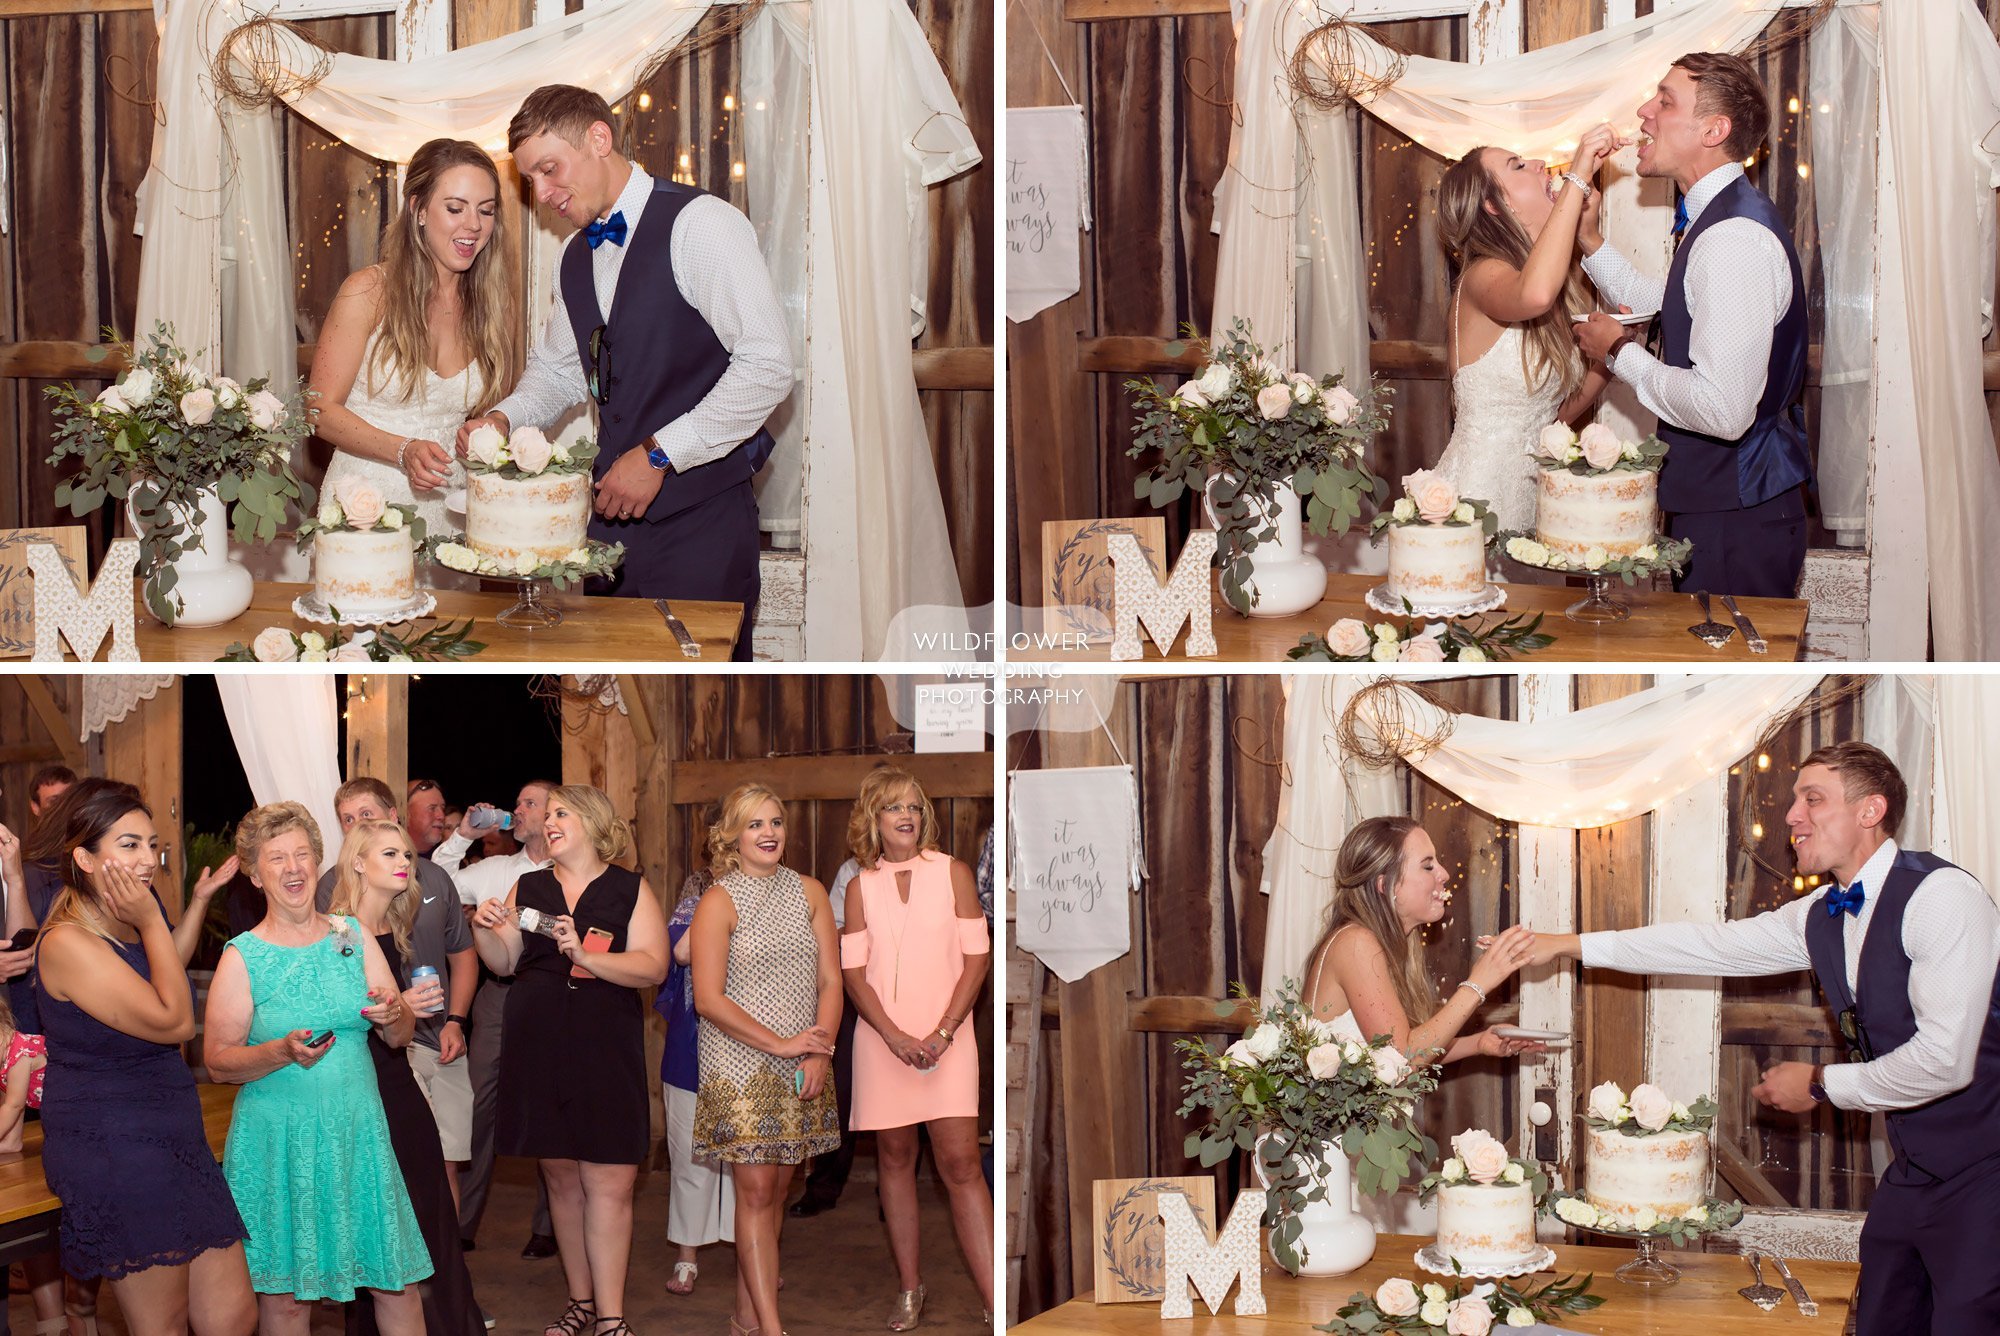 Great photos of the bride and groom cake smash at the barn at Kempker's in southern MO.